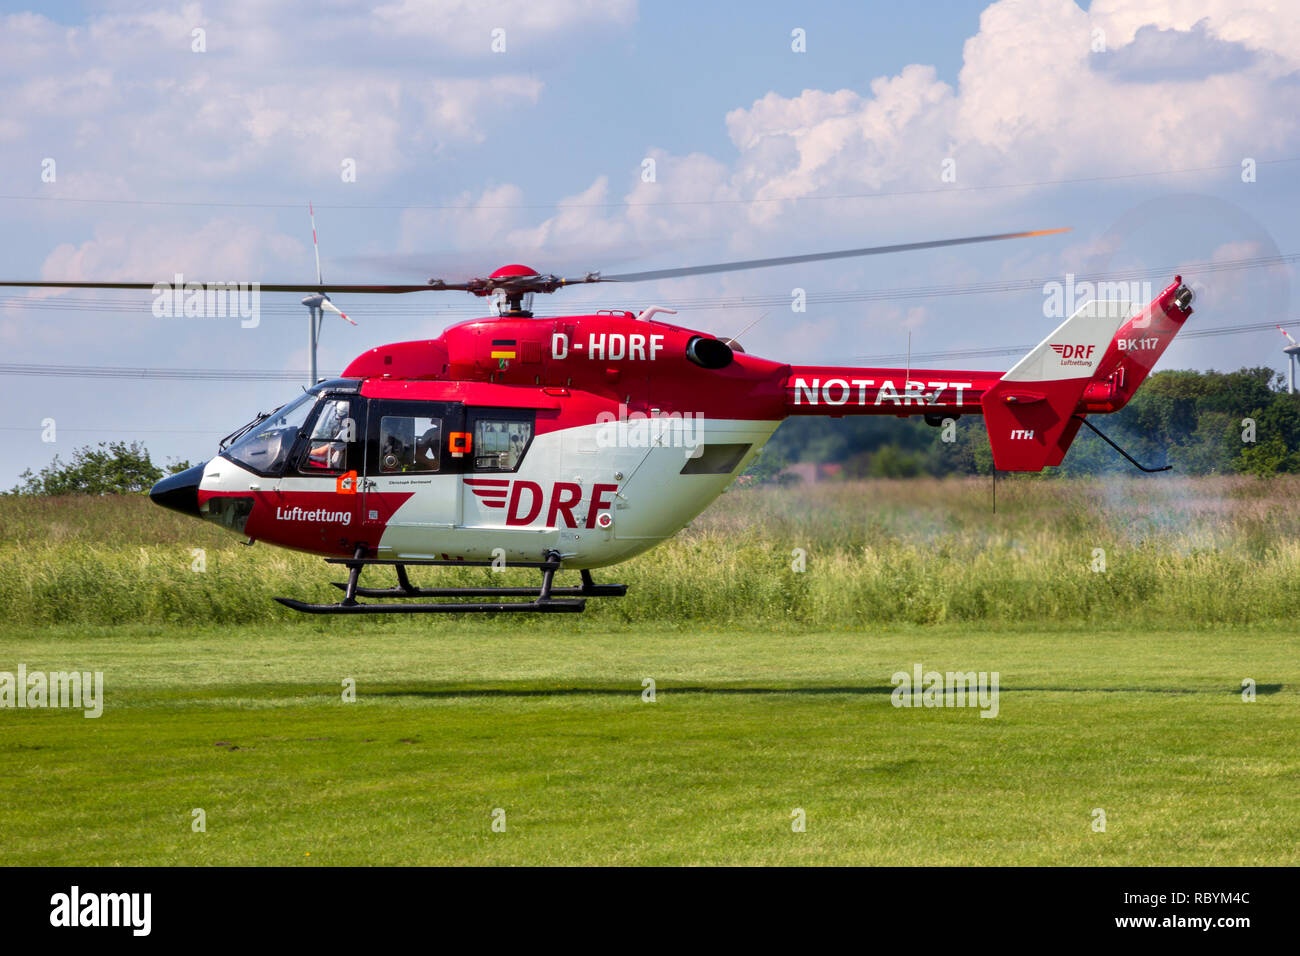 AHLEN GERMANY - JUN 5 2016: DRF Luftrettung (German Air Rescue) BK-117 helicopter landing at Ahlen-Nord heliport Stock Photo